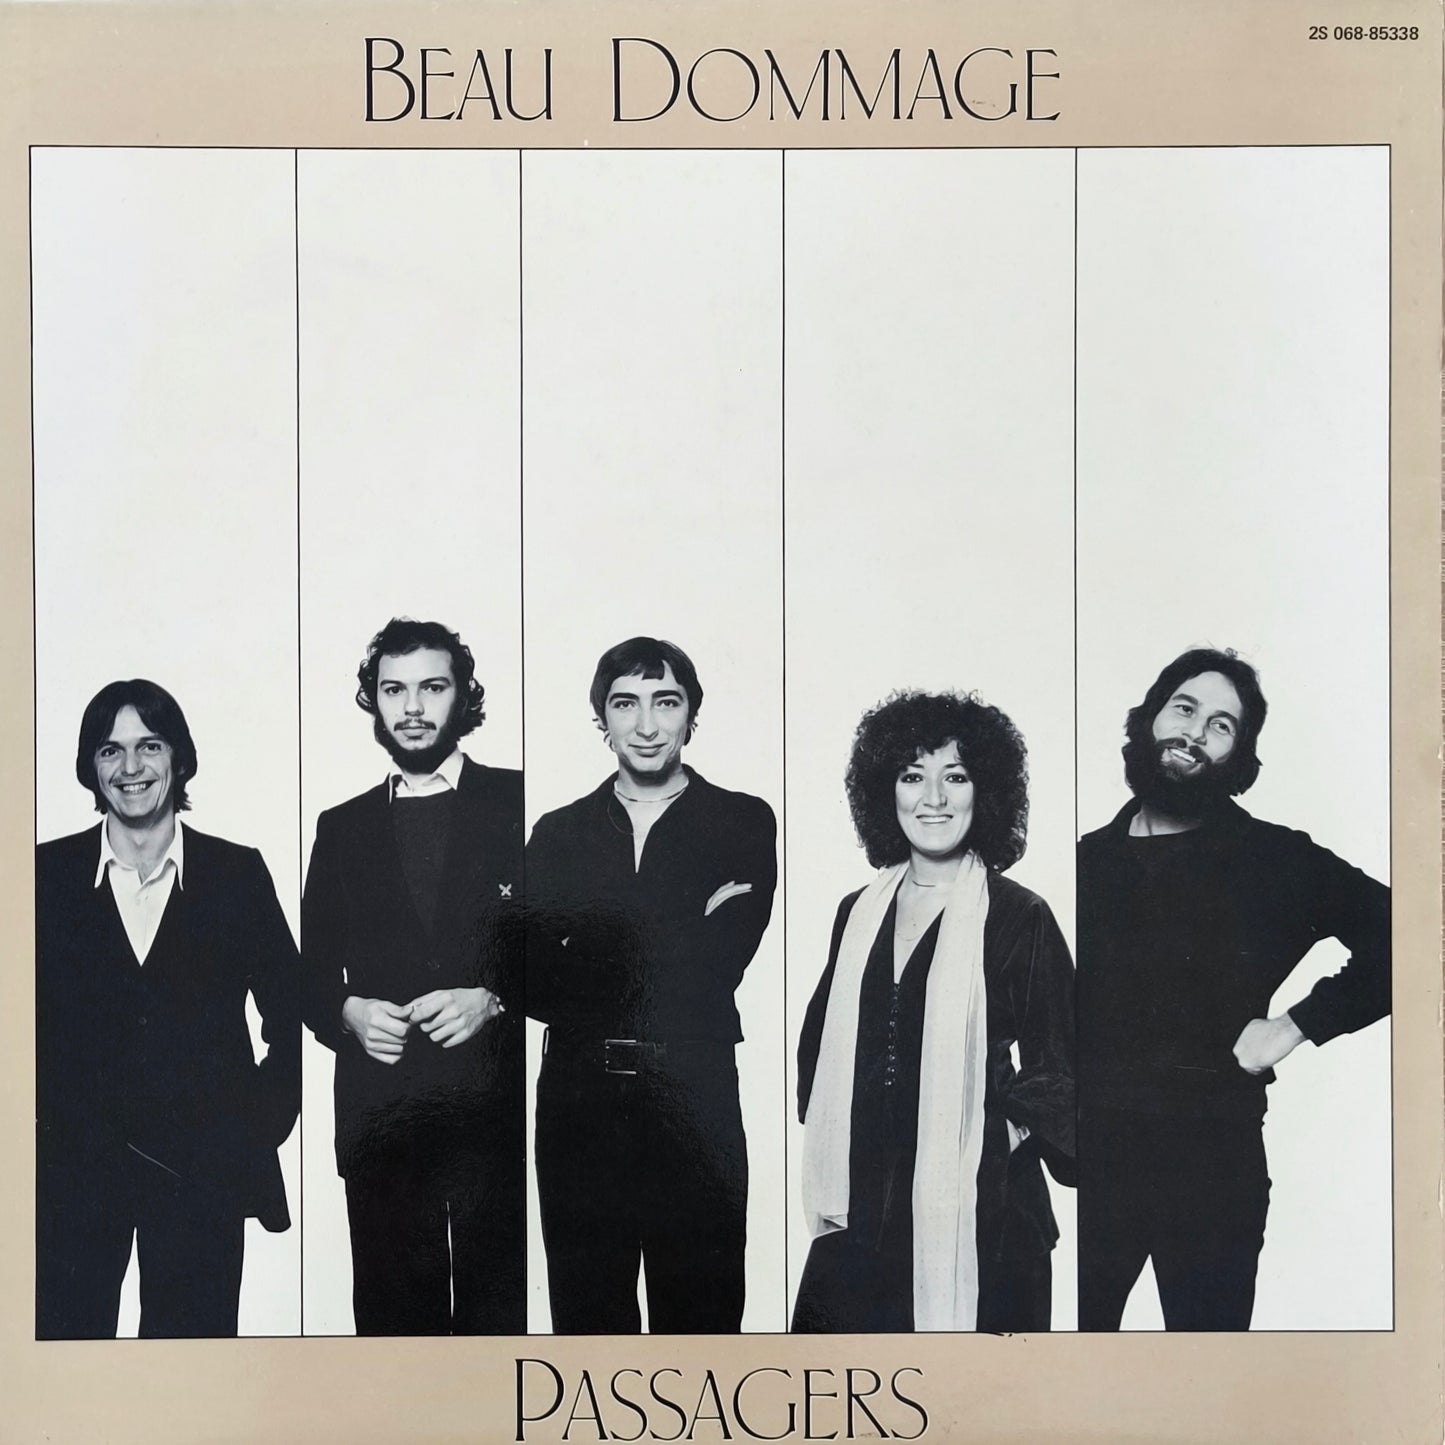 BEAU DOMMAGE - Passagers